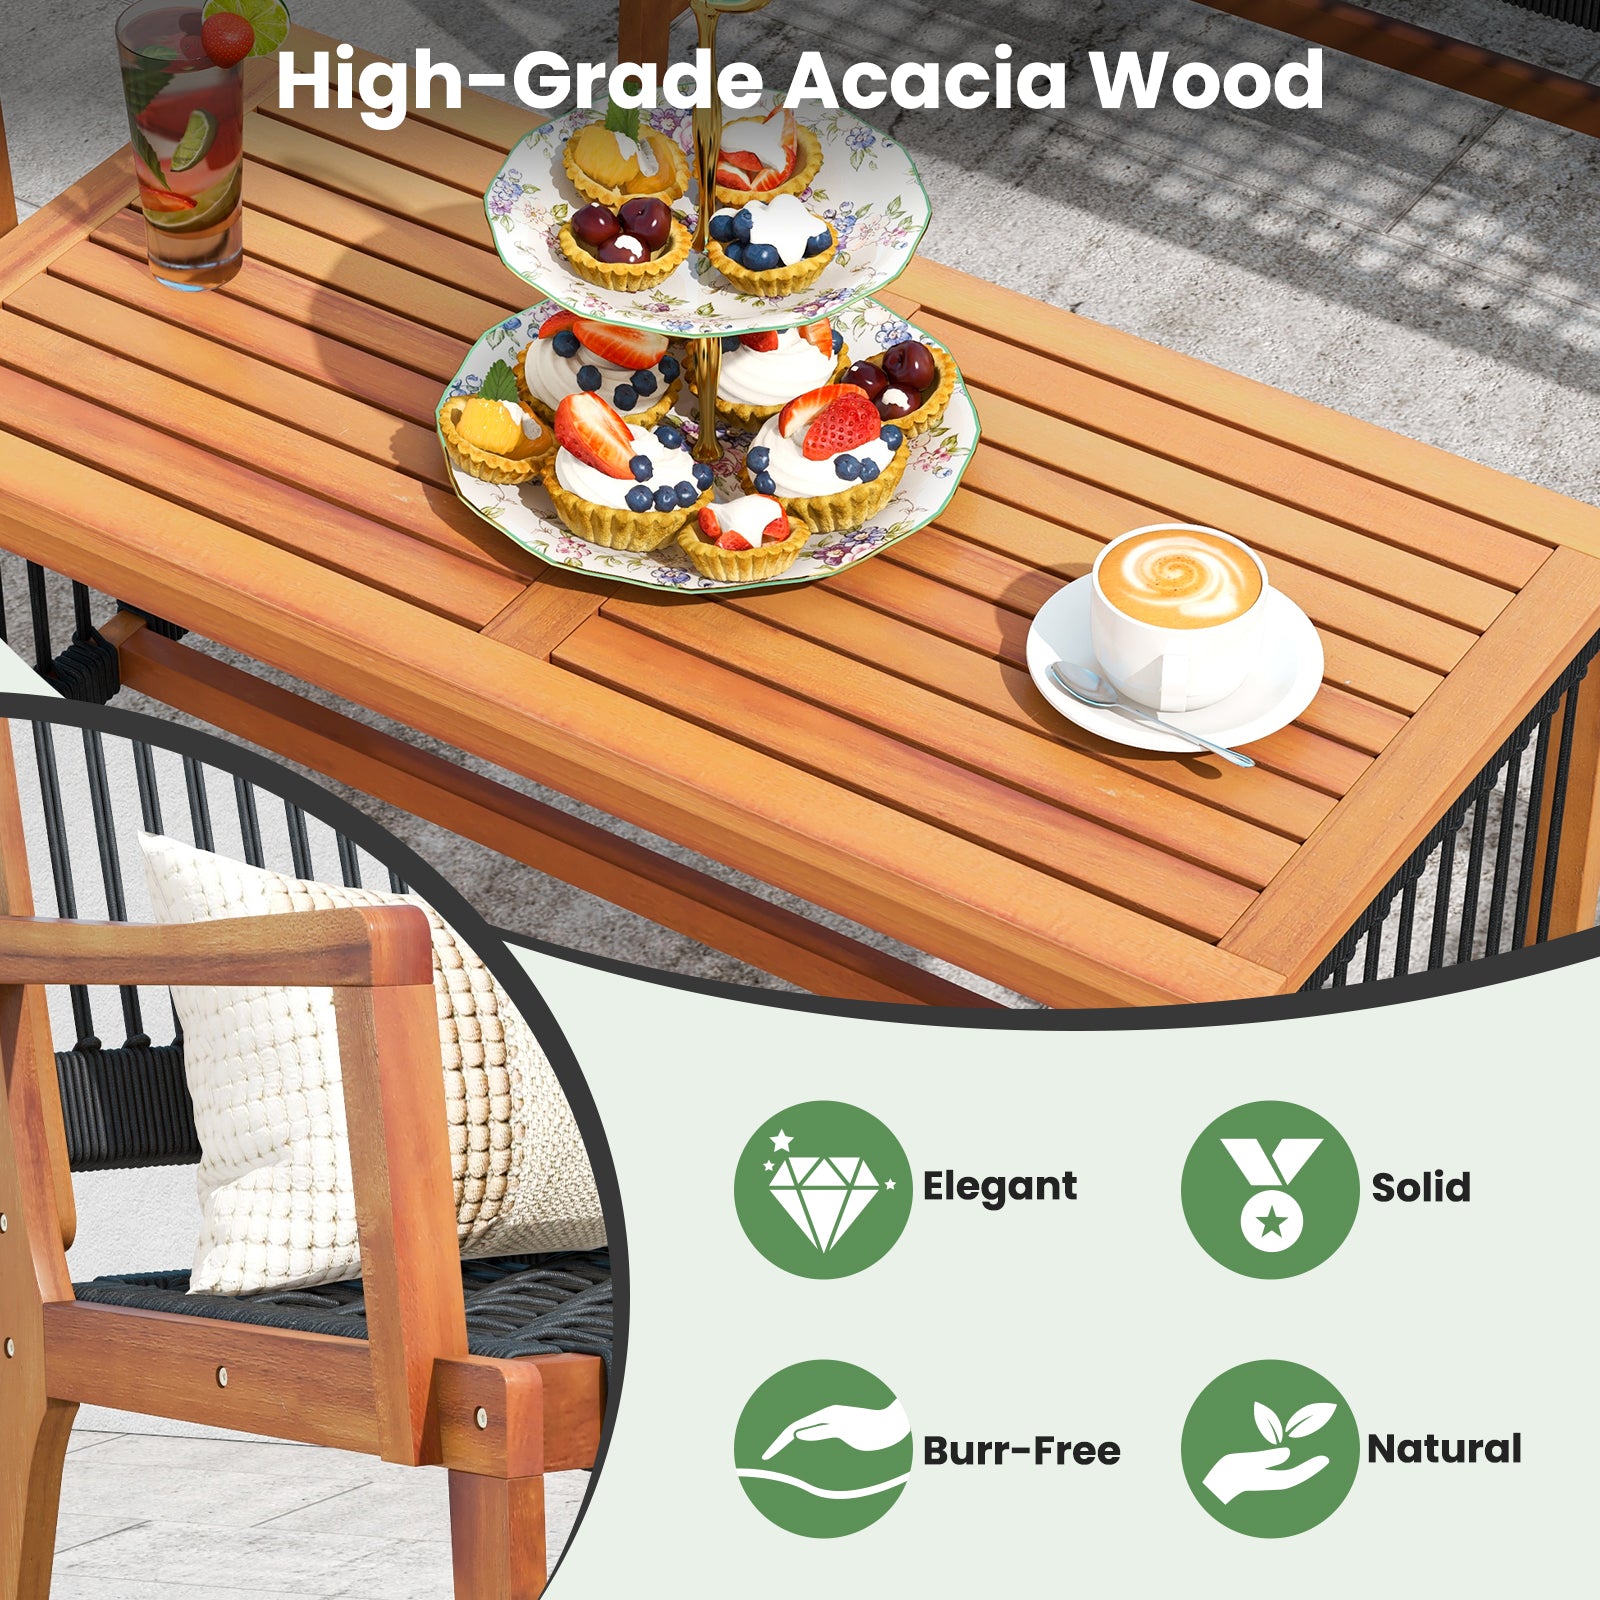 4 Pieces Acacia Wood Conversation Table and Chair Set with Hand Woven Rope for Outdoor Patio